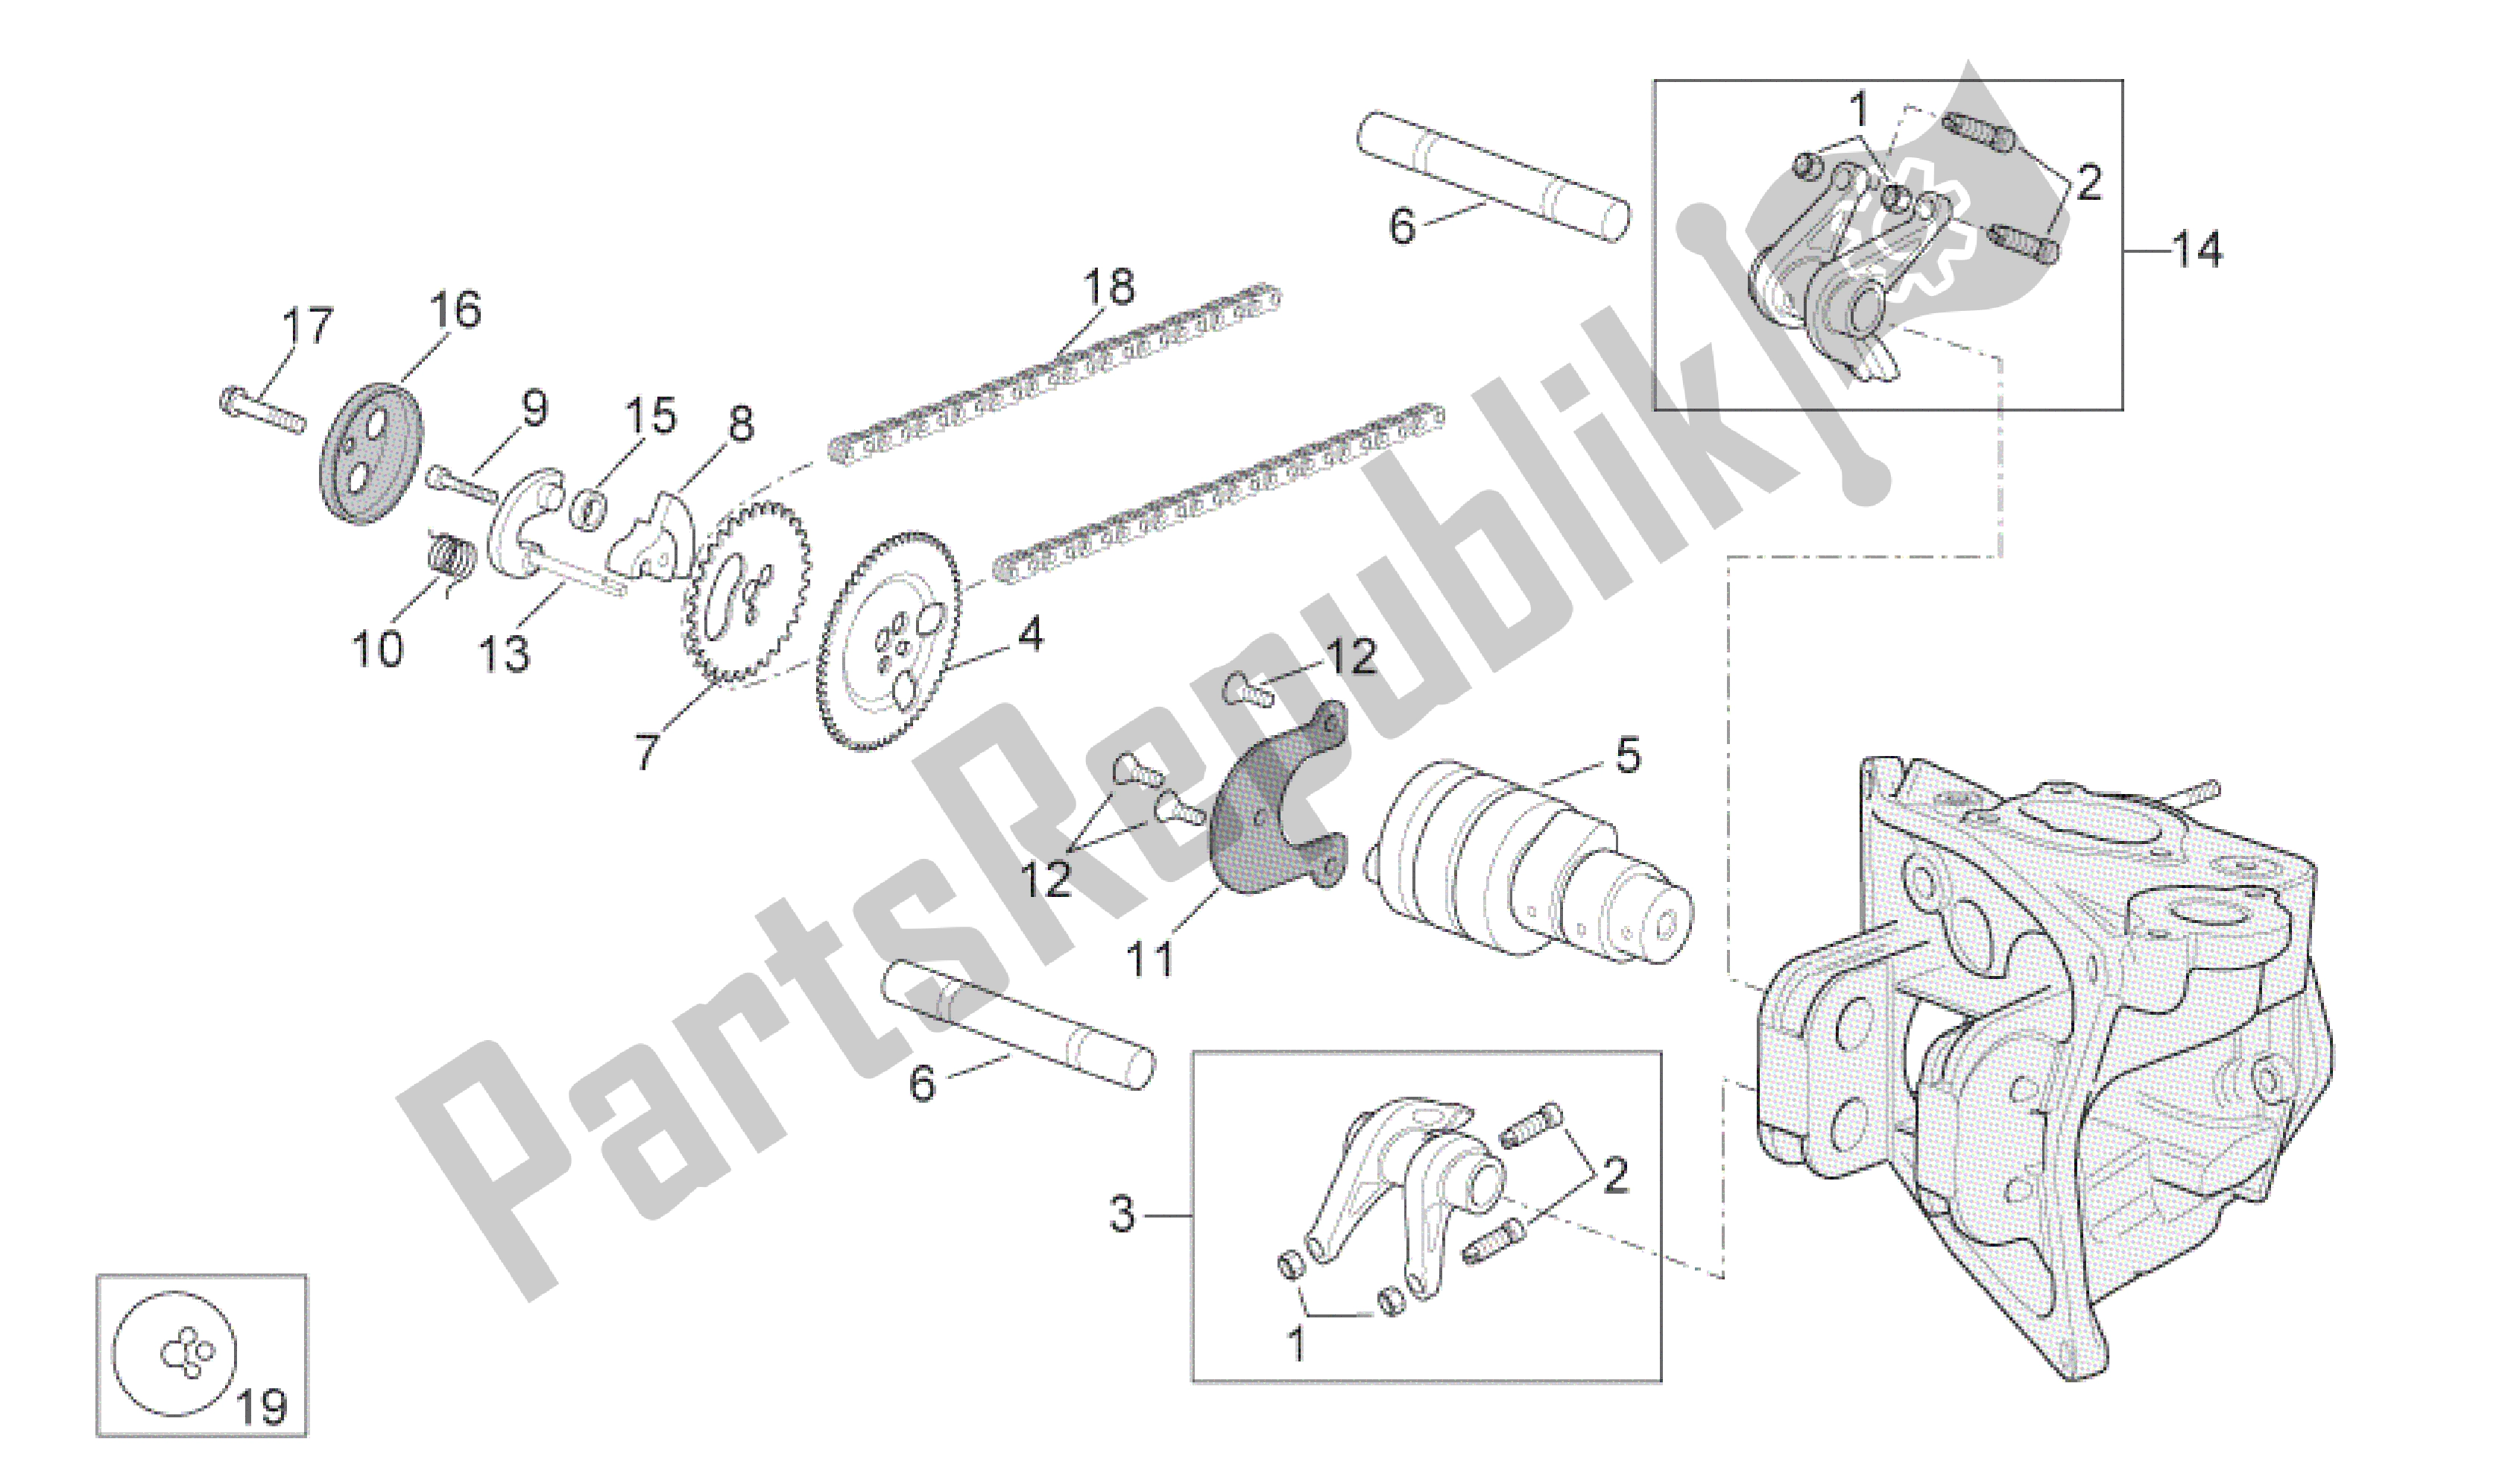 All parts for the Valve Control of the Aprilia Scarabeo 400 2006 - 2008